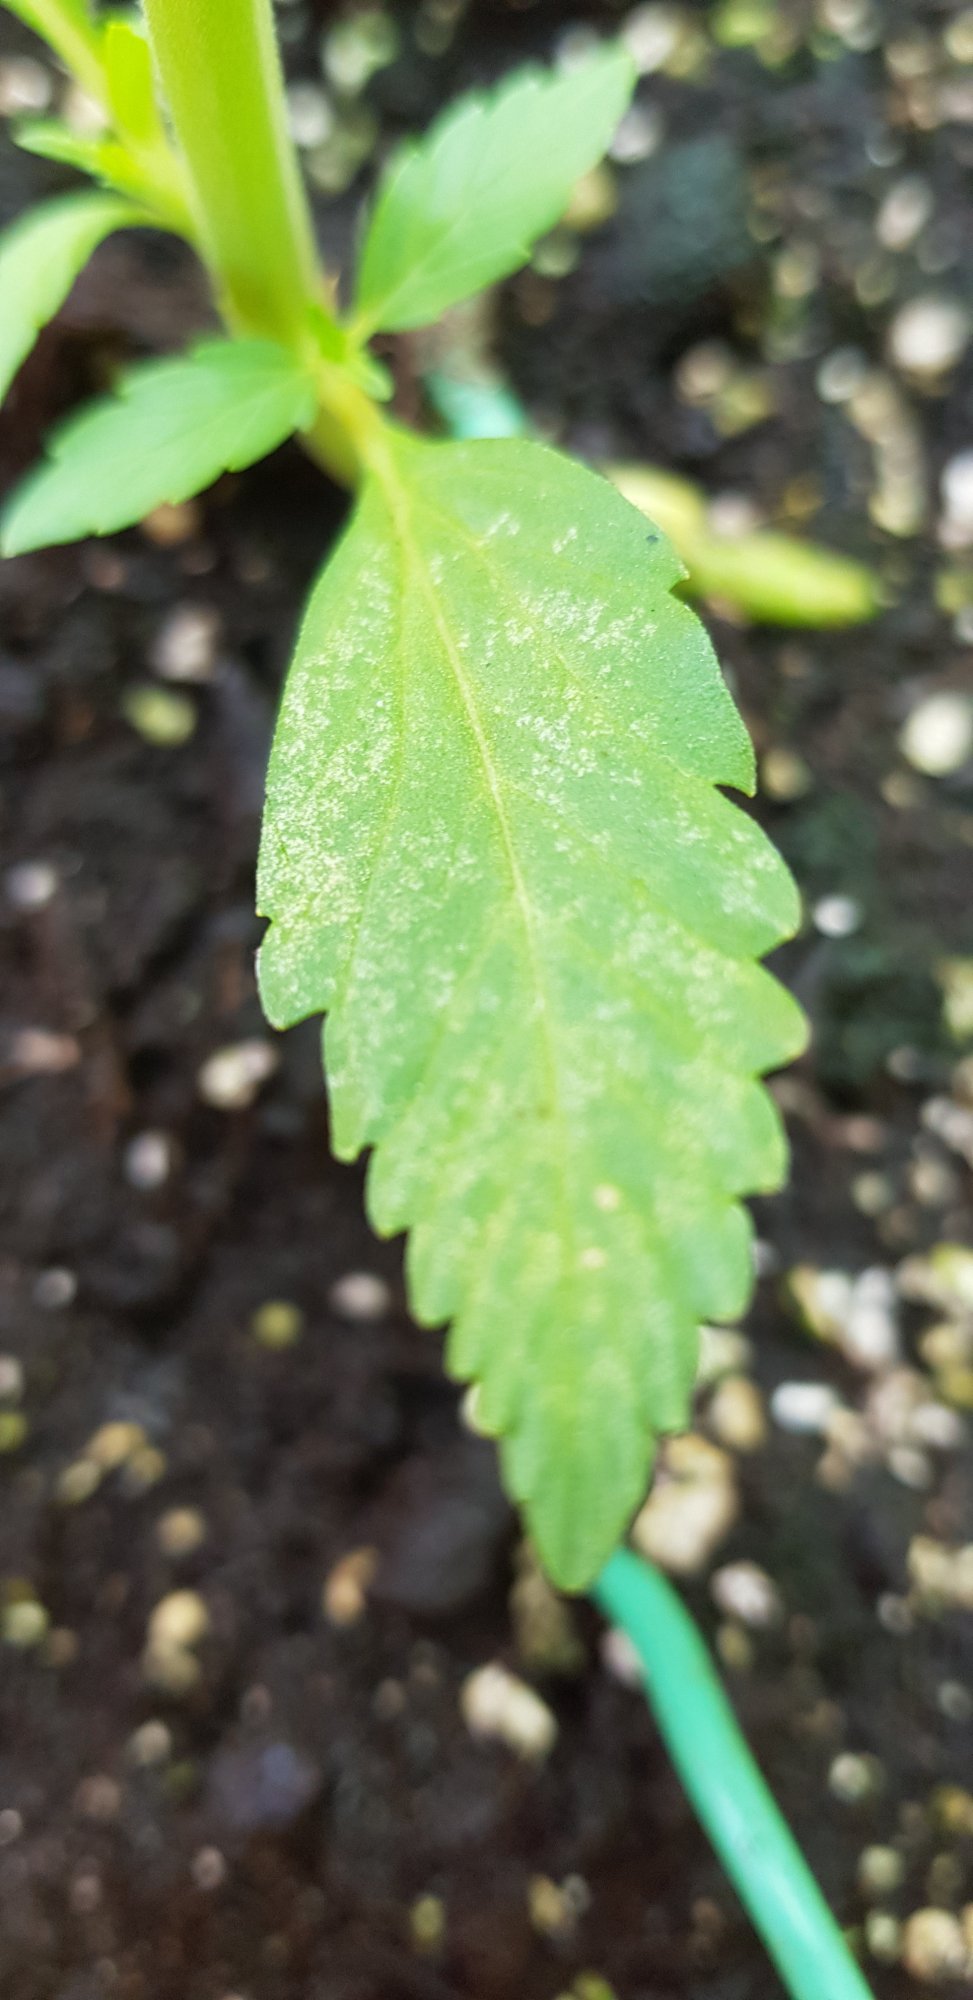 Hi can some help me out please and tell me what i have on my plants i think its powdery mildew